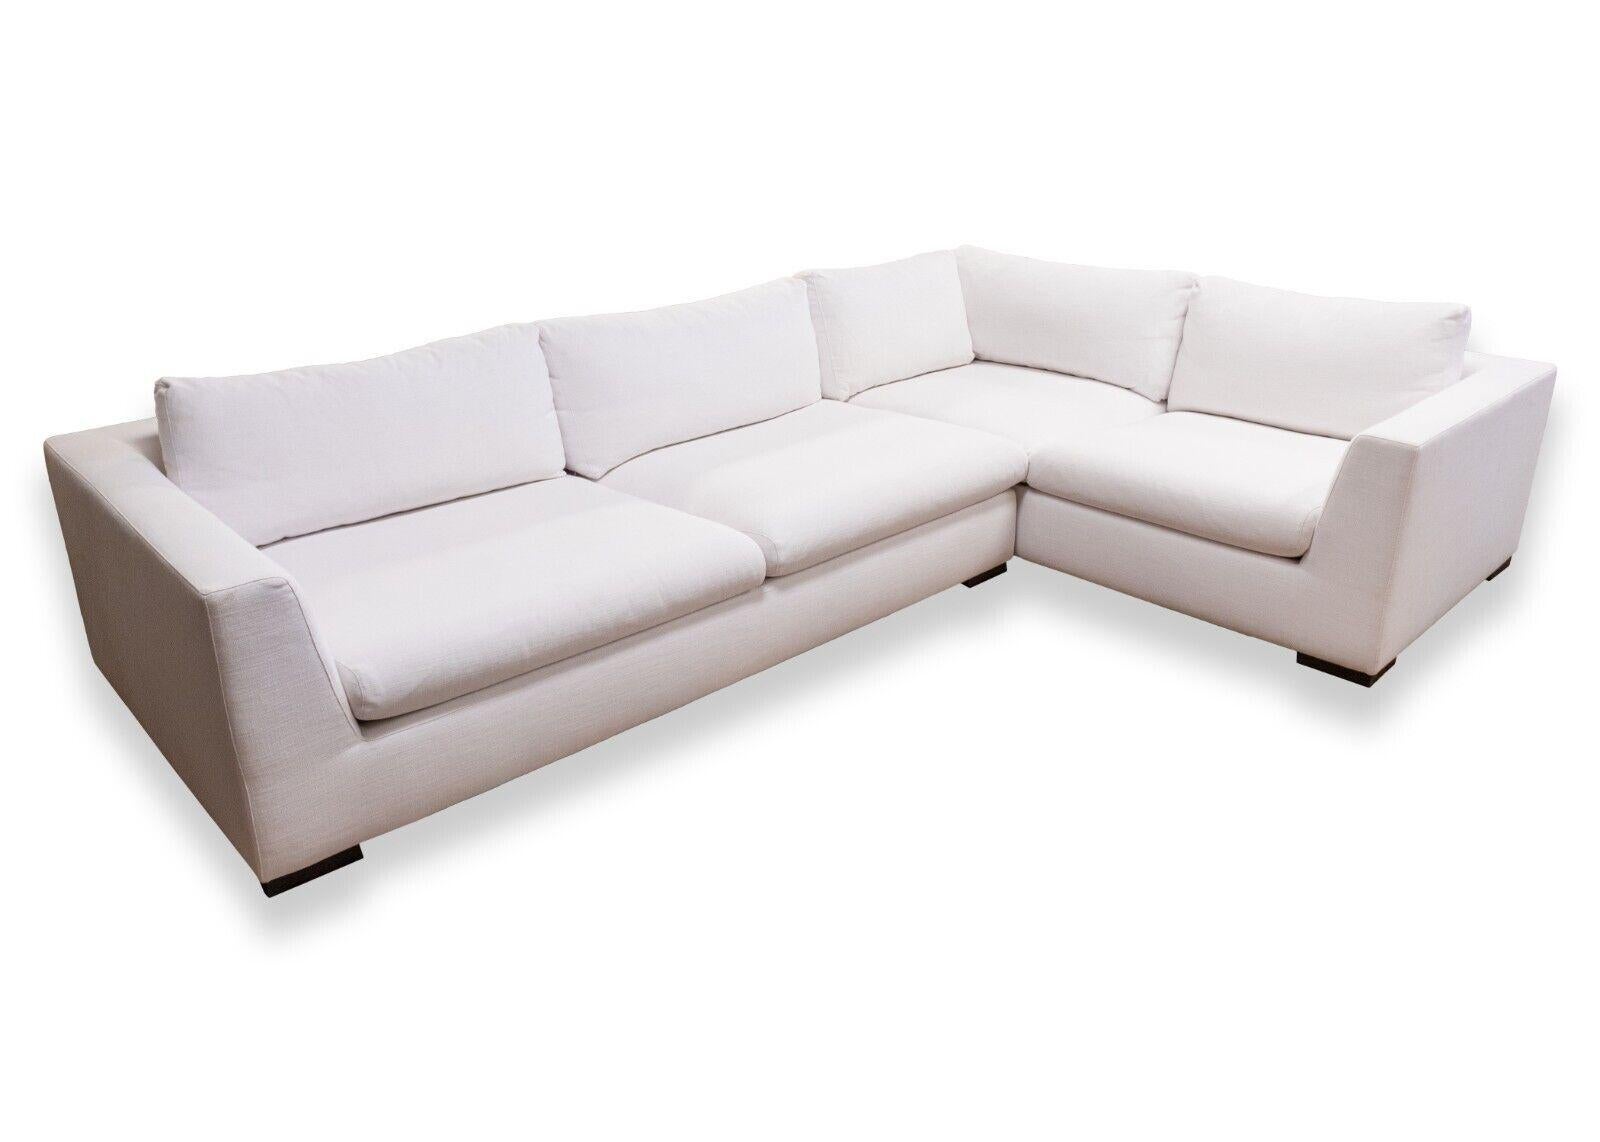 A Restoration Hardware bright white two piece sofa sectional. This stunning couch from Restoration Hardware boasts a very clean, bright white upholstery with fine stitching. This sofa sectional comes in a two piece design. The two pieces are